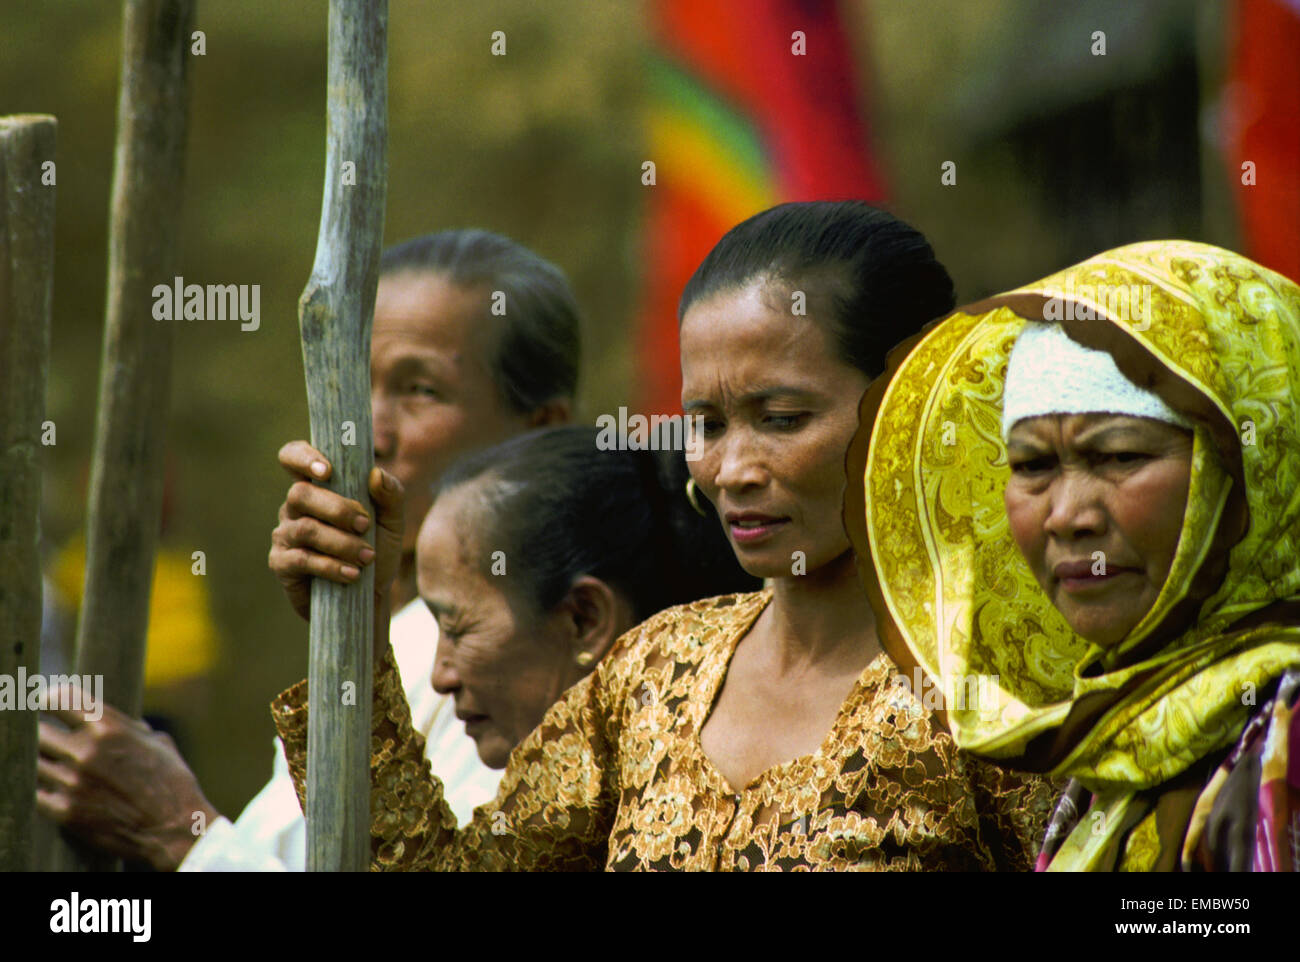 A group of women farmers pounding rice during annual harvest thanksgiving festival in traditional village of Ciptagelar, West Java, Indonesia. Stock Photo